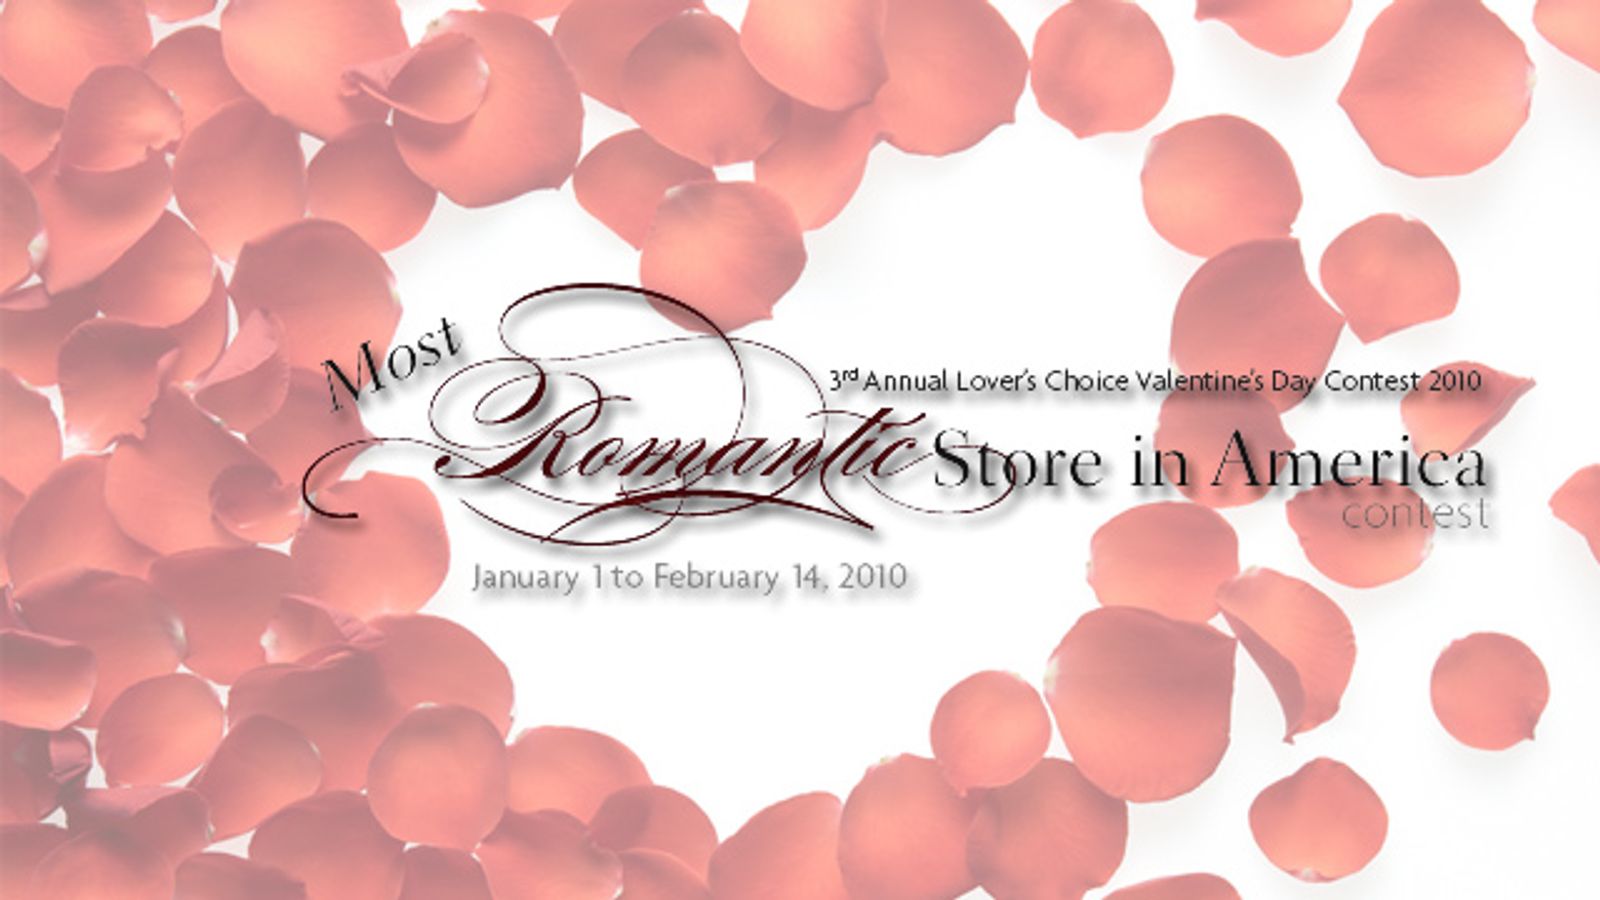 Retailers Can Win Big Bucks in Lover’s Choice Contest